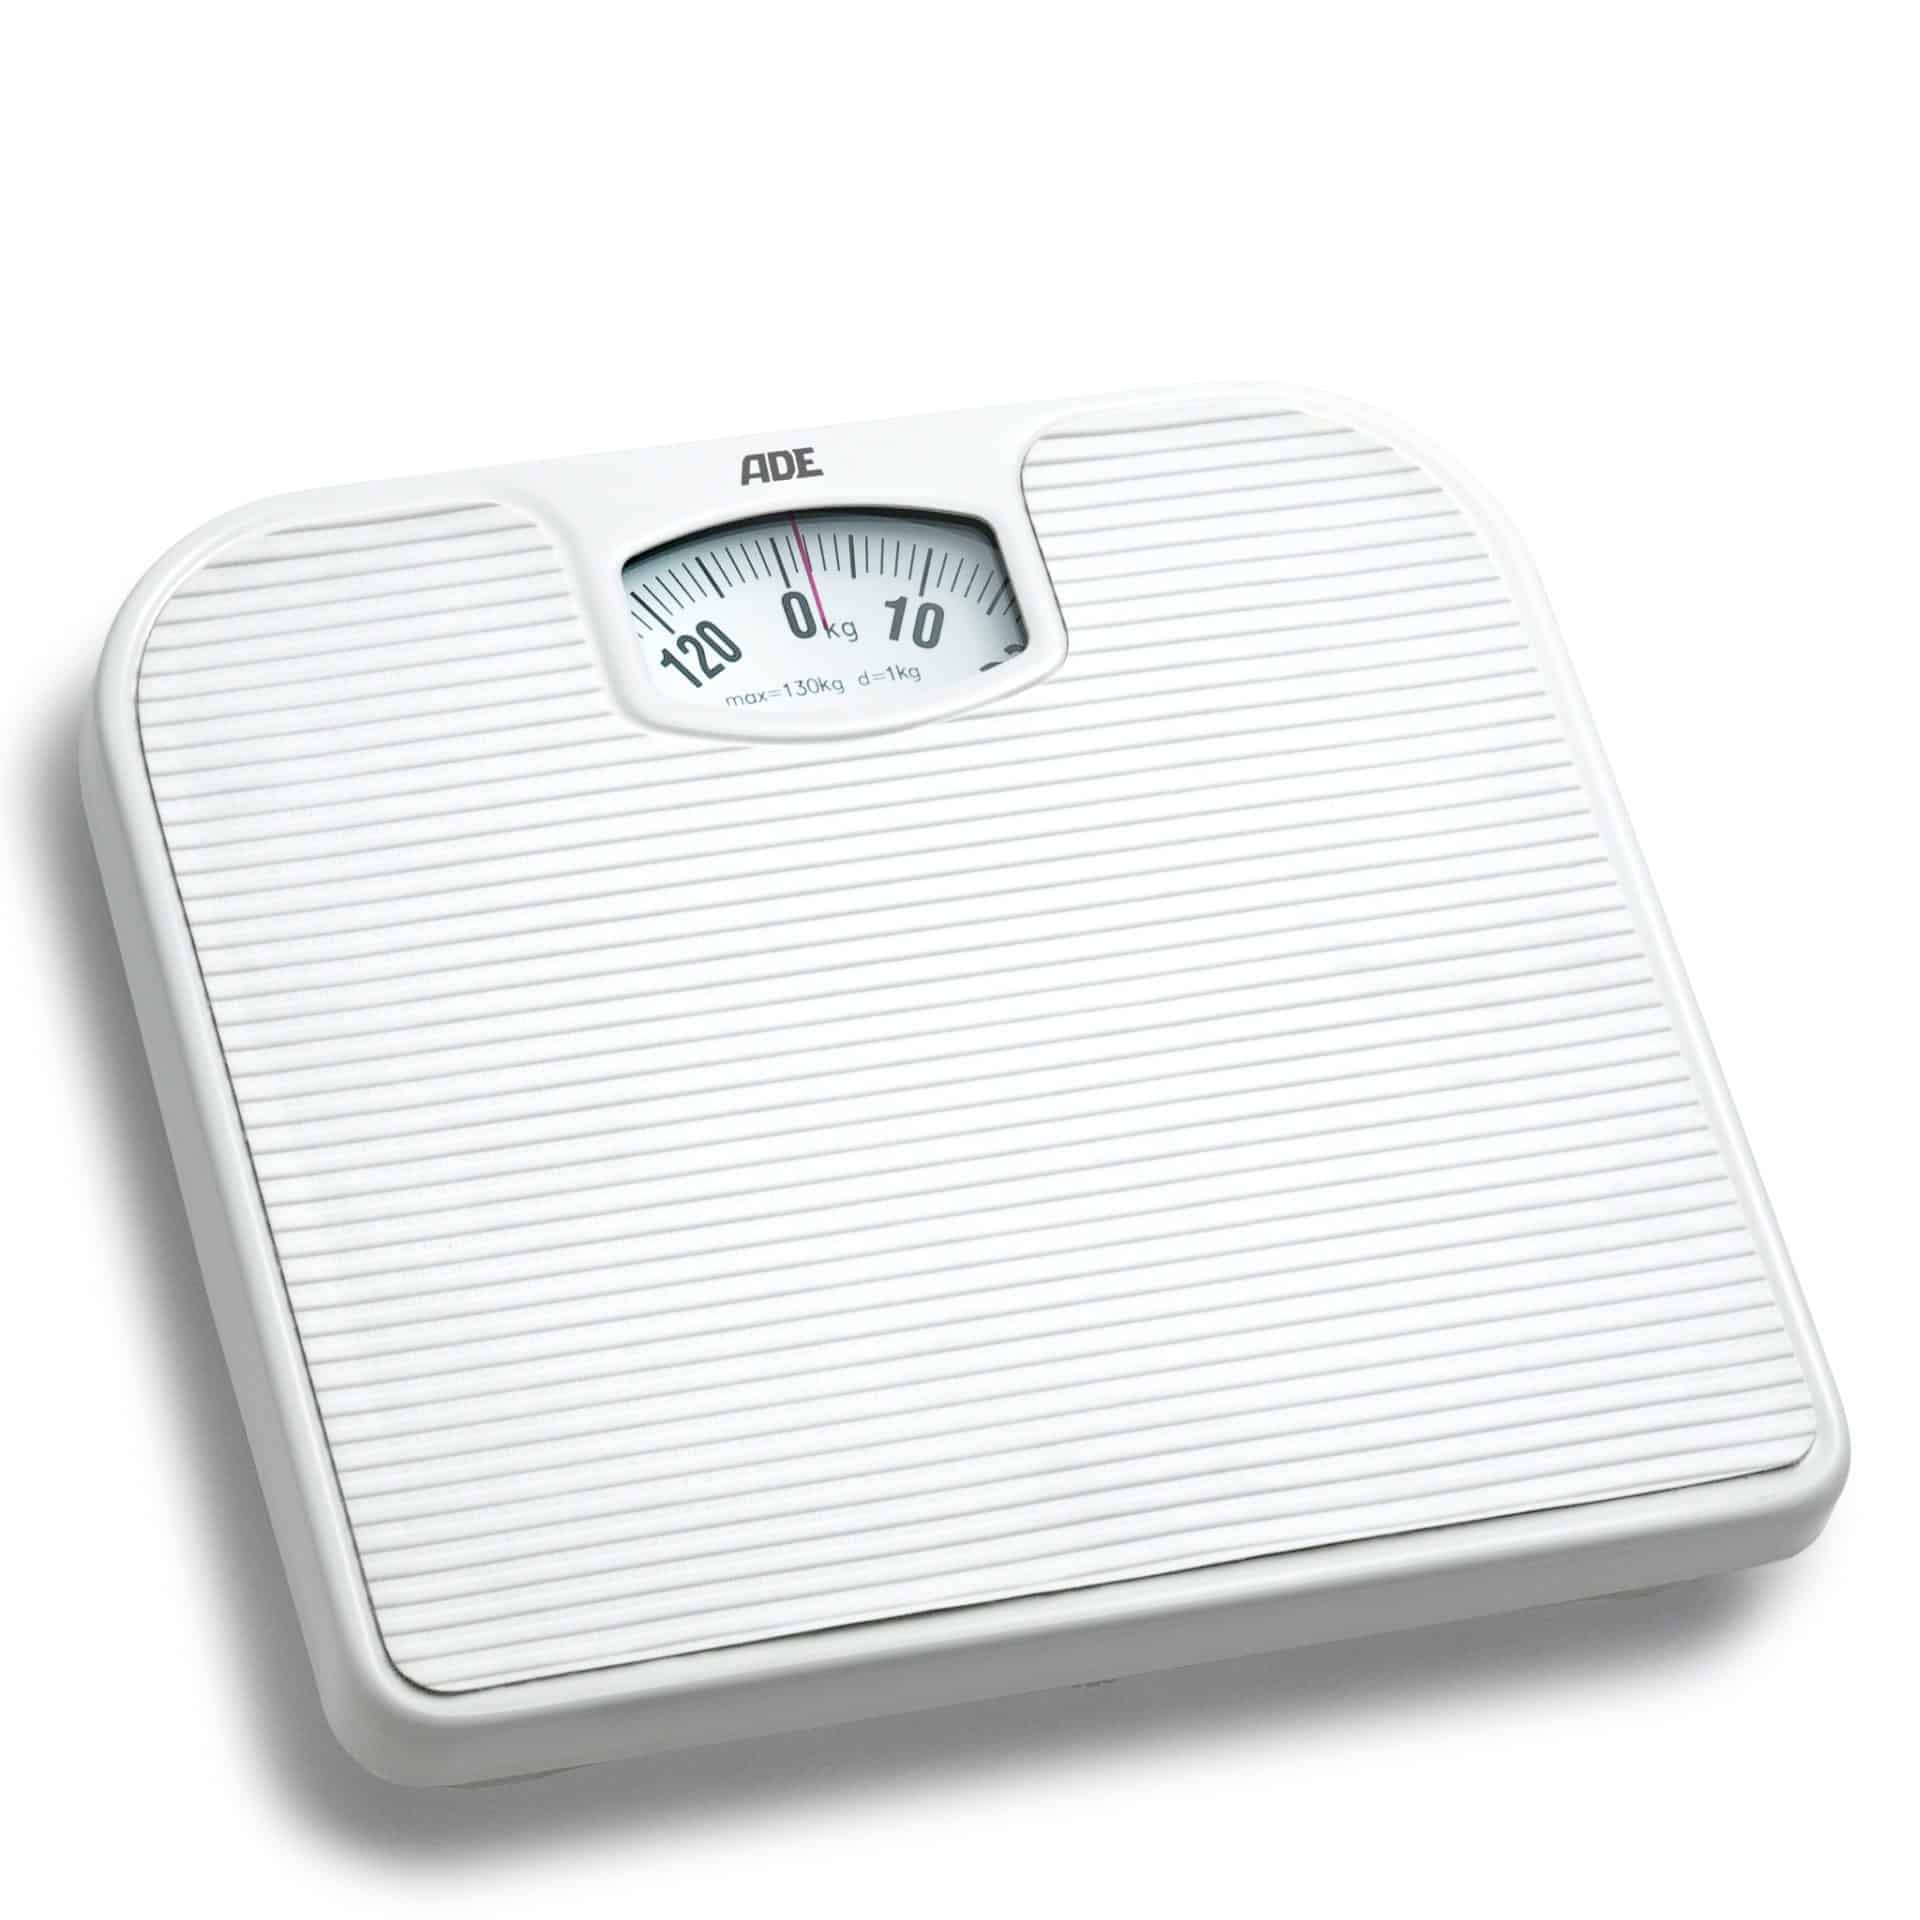 Classic Retró Design,Sturdy structure White. Precise up to 120kg ADE BM707 Mechanical Bodyweight Scale ABS Plastic and stainless steel 